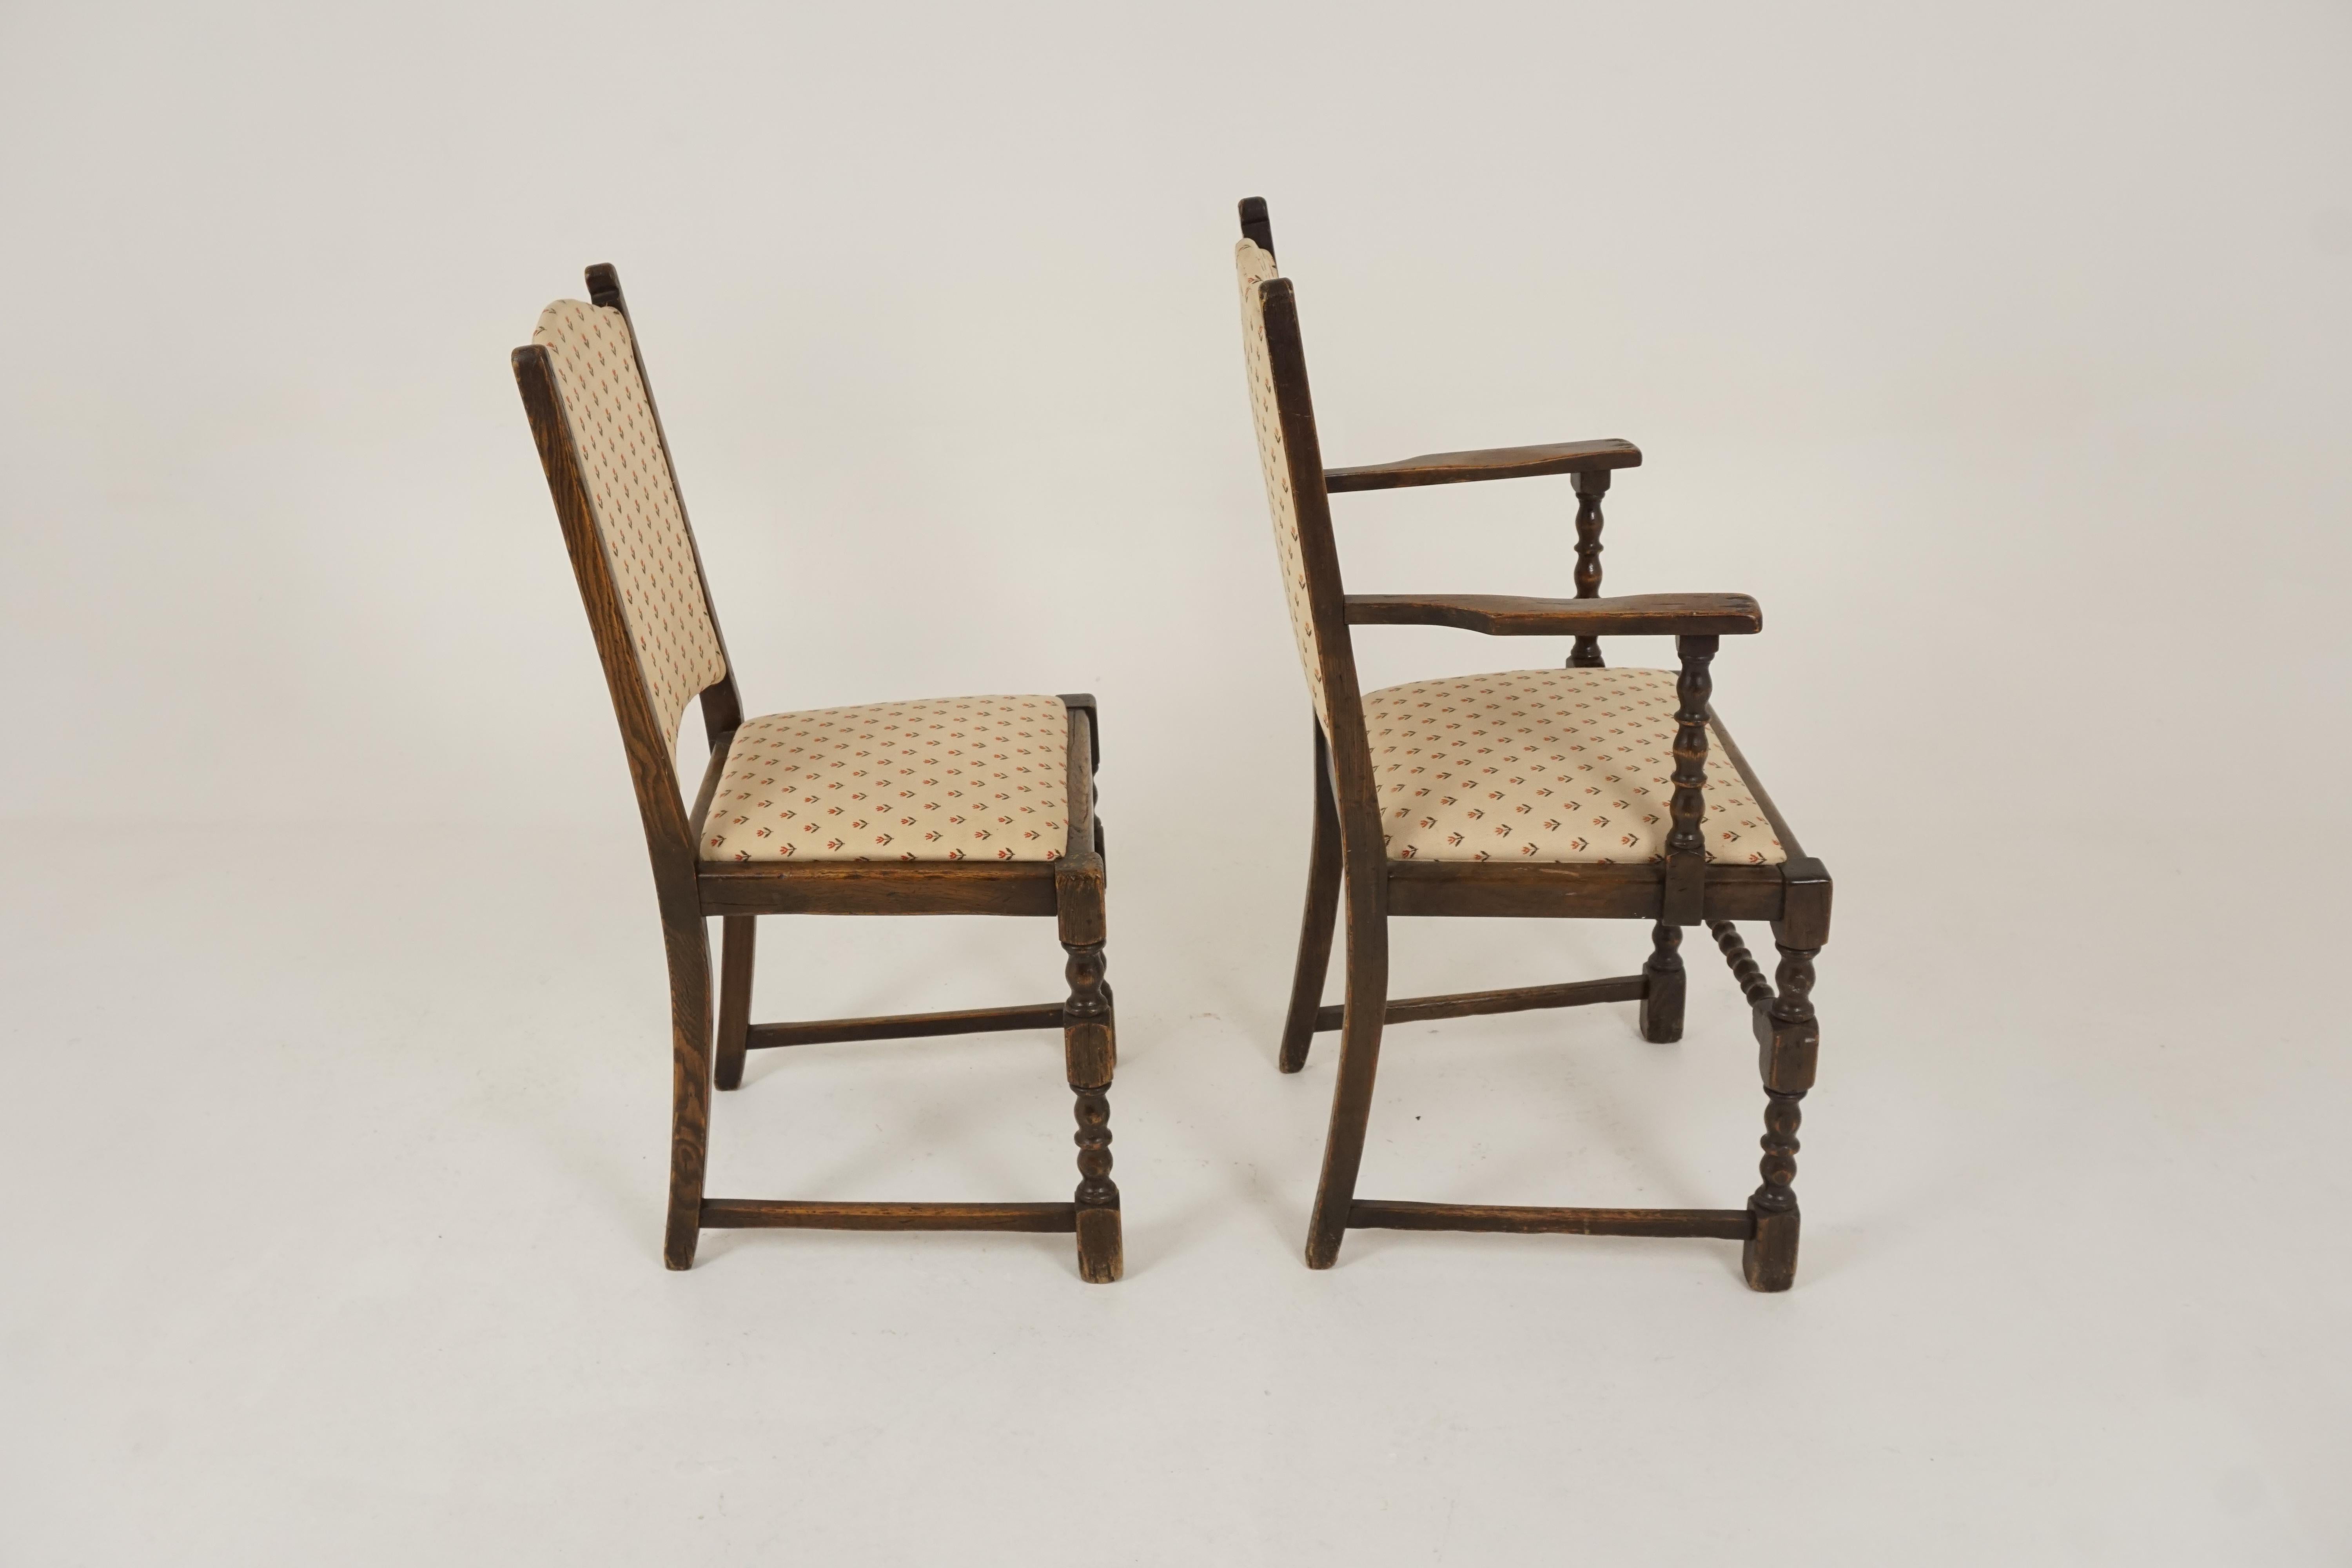 Hand-Crafted Set of 8 Oak Dining Chairs by Jaycee Brighton Sussex England, 1960, B2322